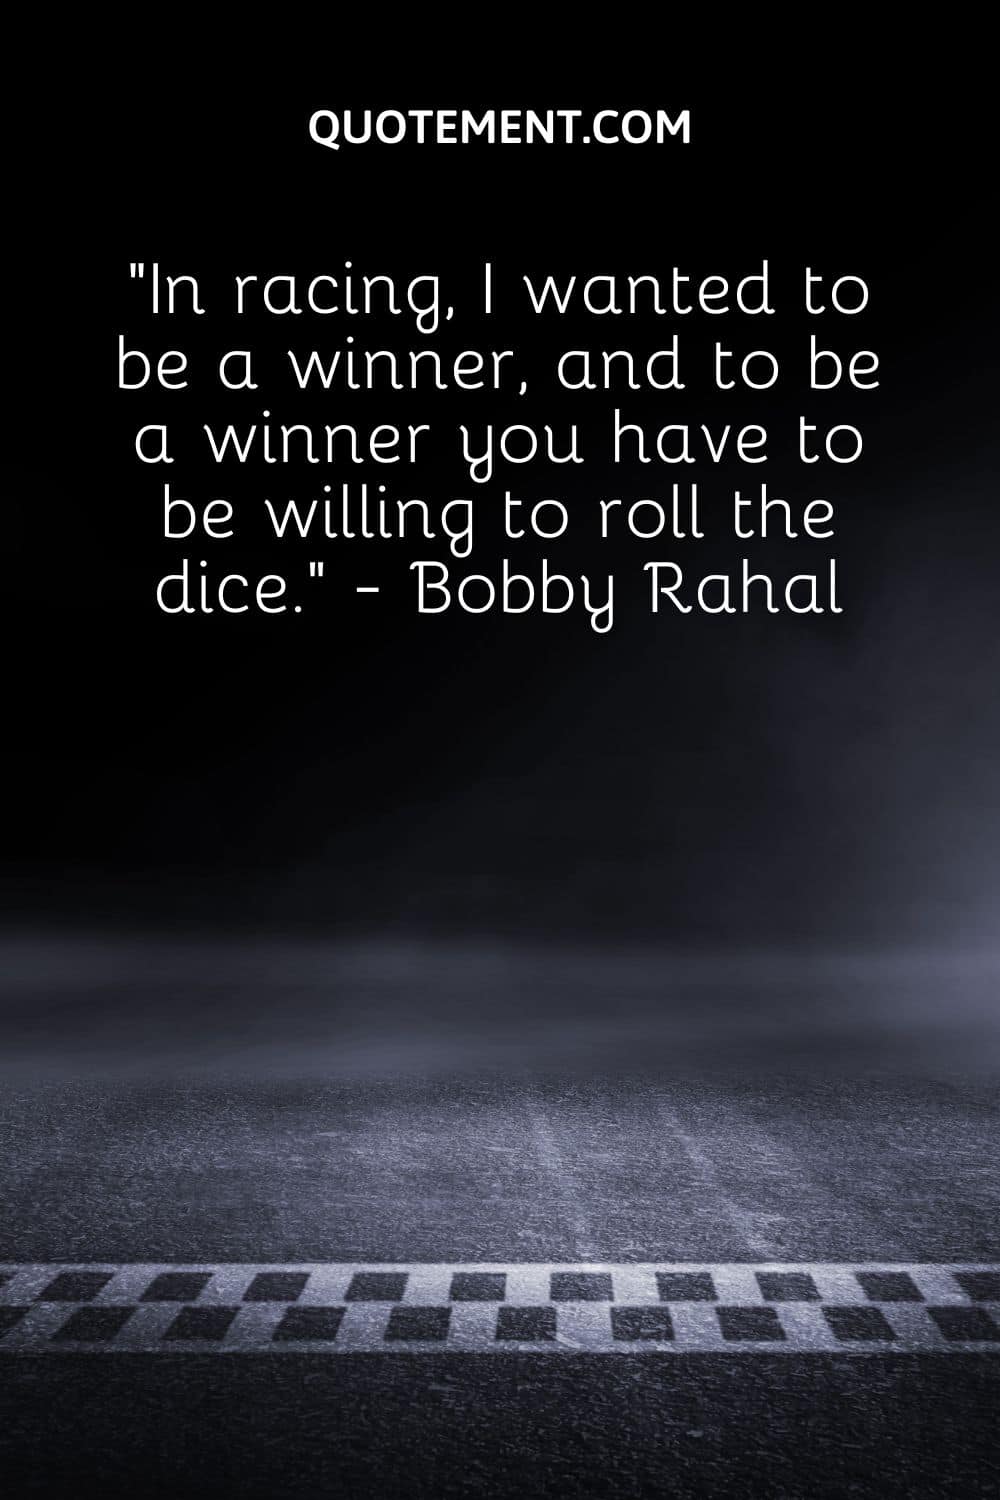 In racing, I wanted to be a winner, and to be a winner you have to be willing to roll the dice